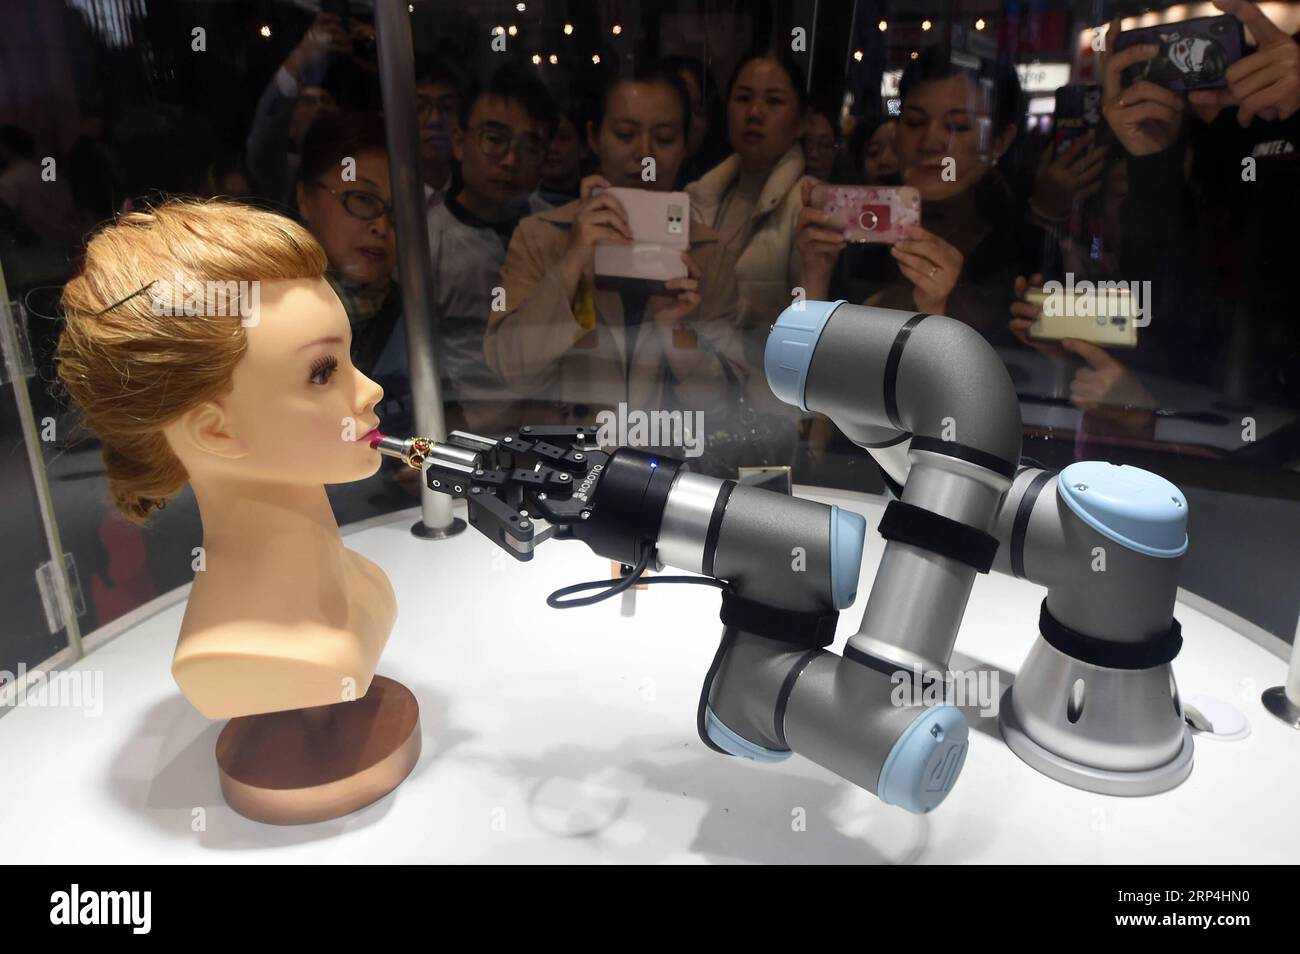 (181109) -- SHANGHAI, Nov. 9, 2018 -- Visitors view a robot arm performing makeup tutorship at the Apparel, Accessories & Consumer Goods area of the first China International Import Expo (CIIE) in Shanghai, east China, Nov. 9, 2018. )(ly) (IMPORT EXPO)CHINA-SHANGHAI-CIIE (CN) HanxYuqing PUBLICATIONxNOTxINxCHN Stock Photo